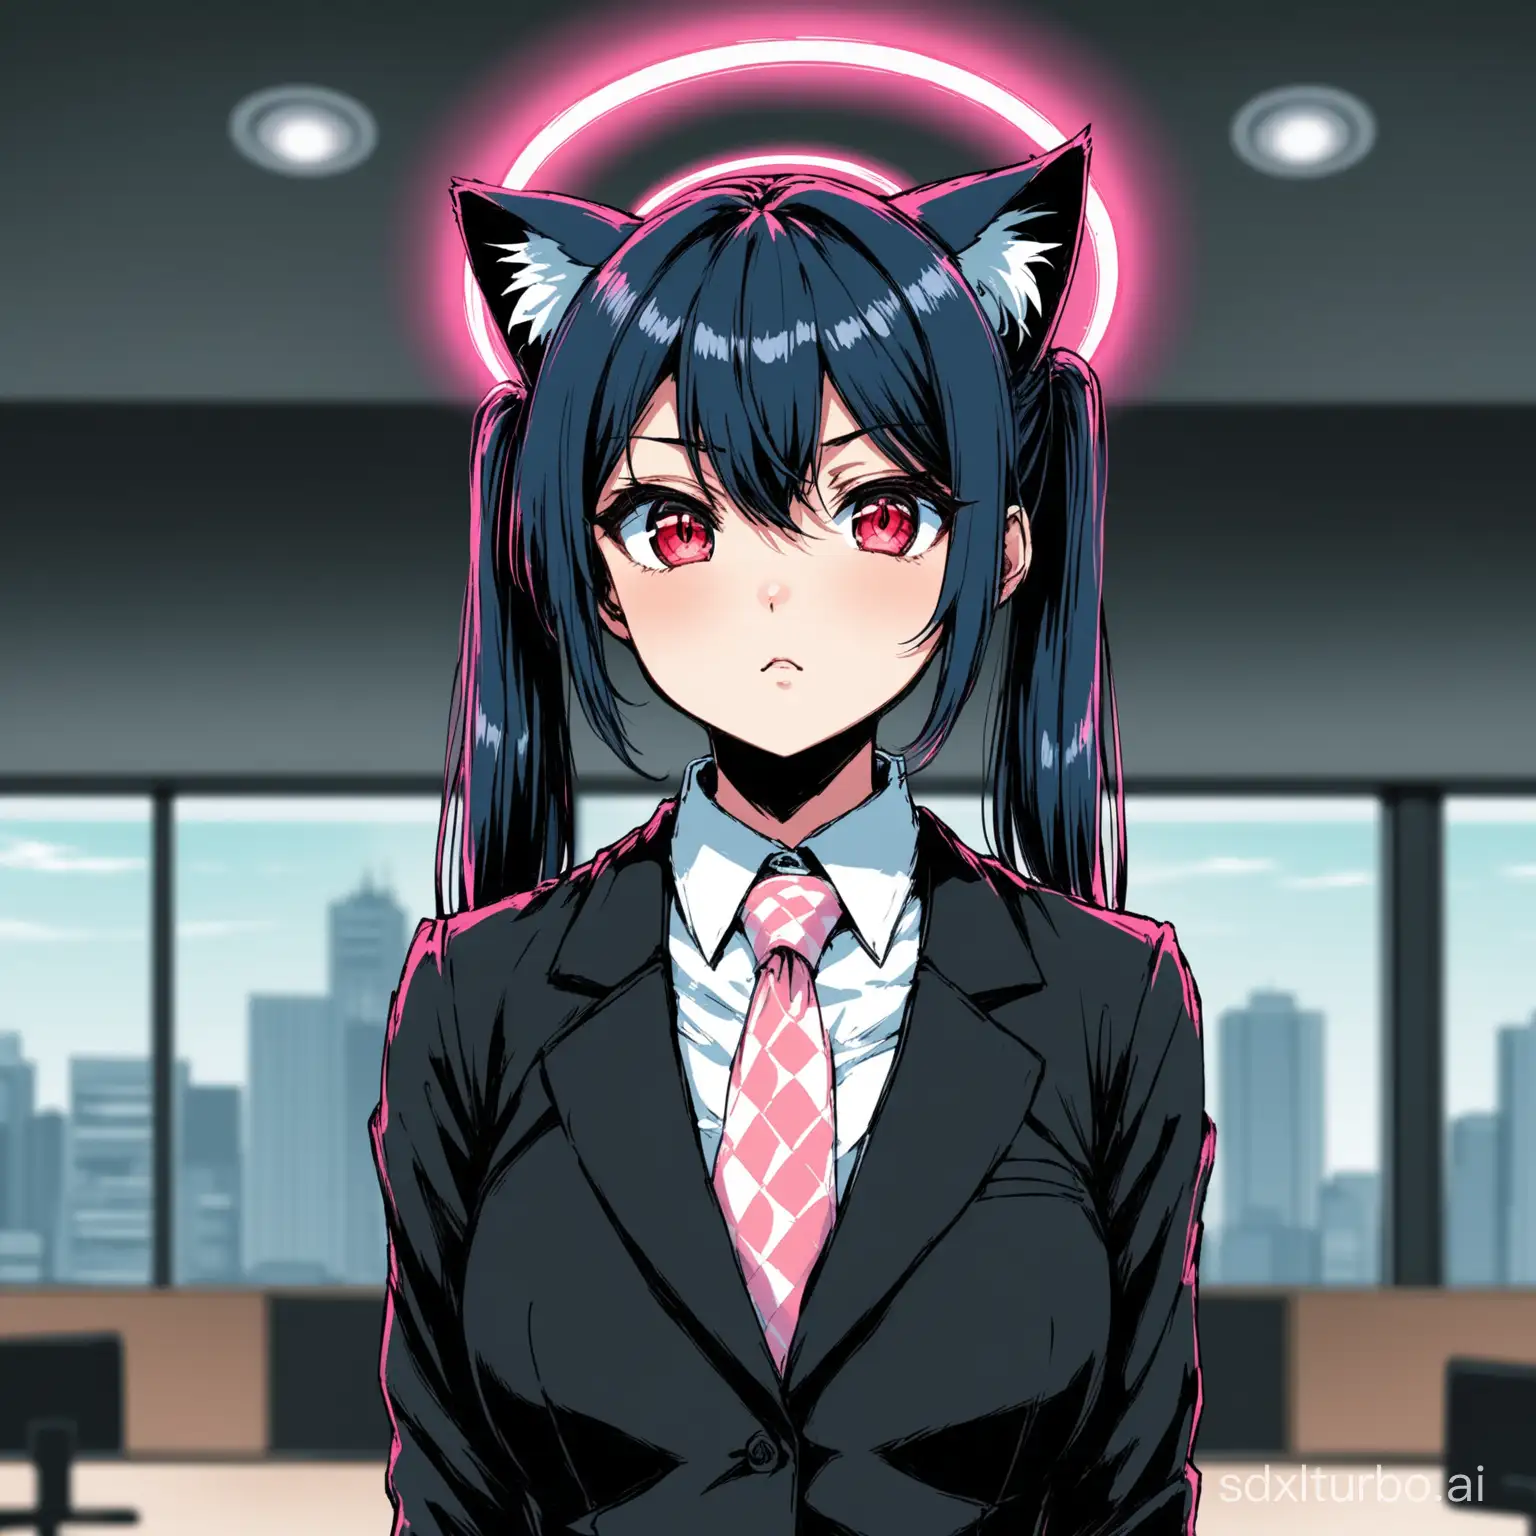 Anime-Style-Girl-with-Cat-Ears-in-Office-Setting